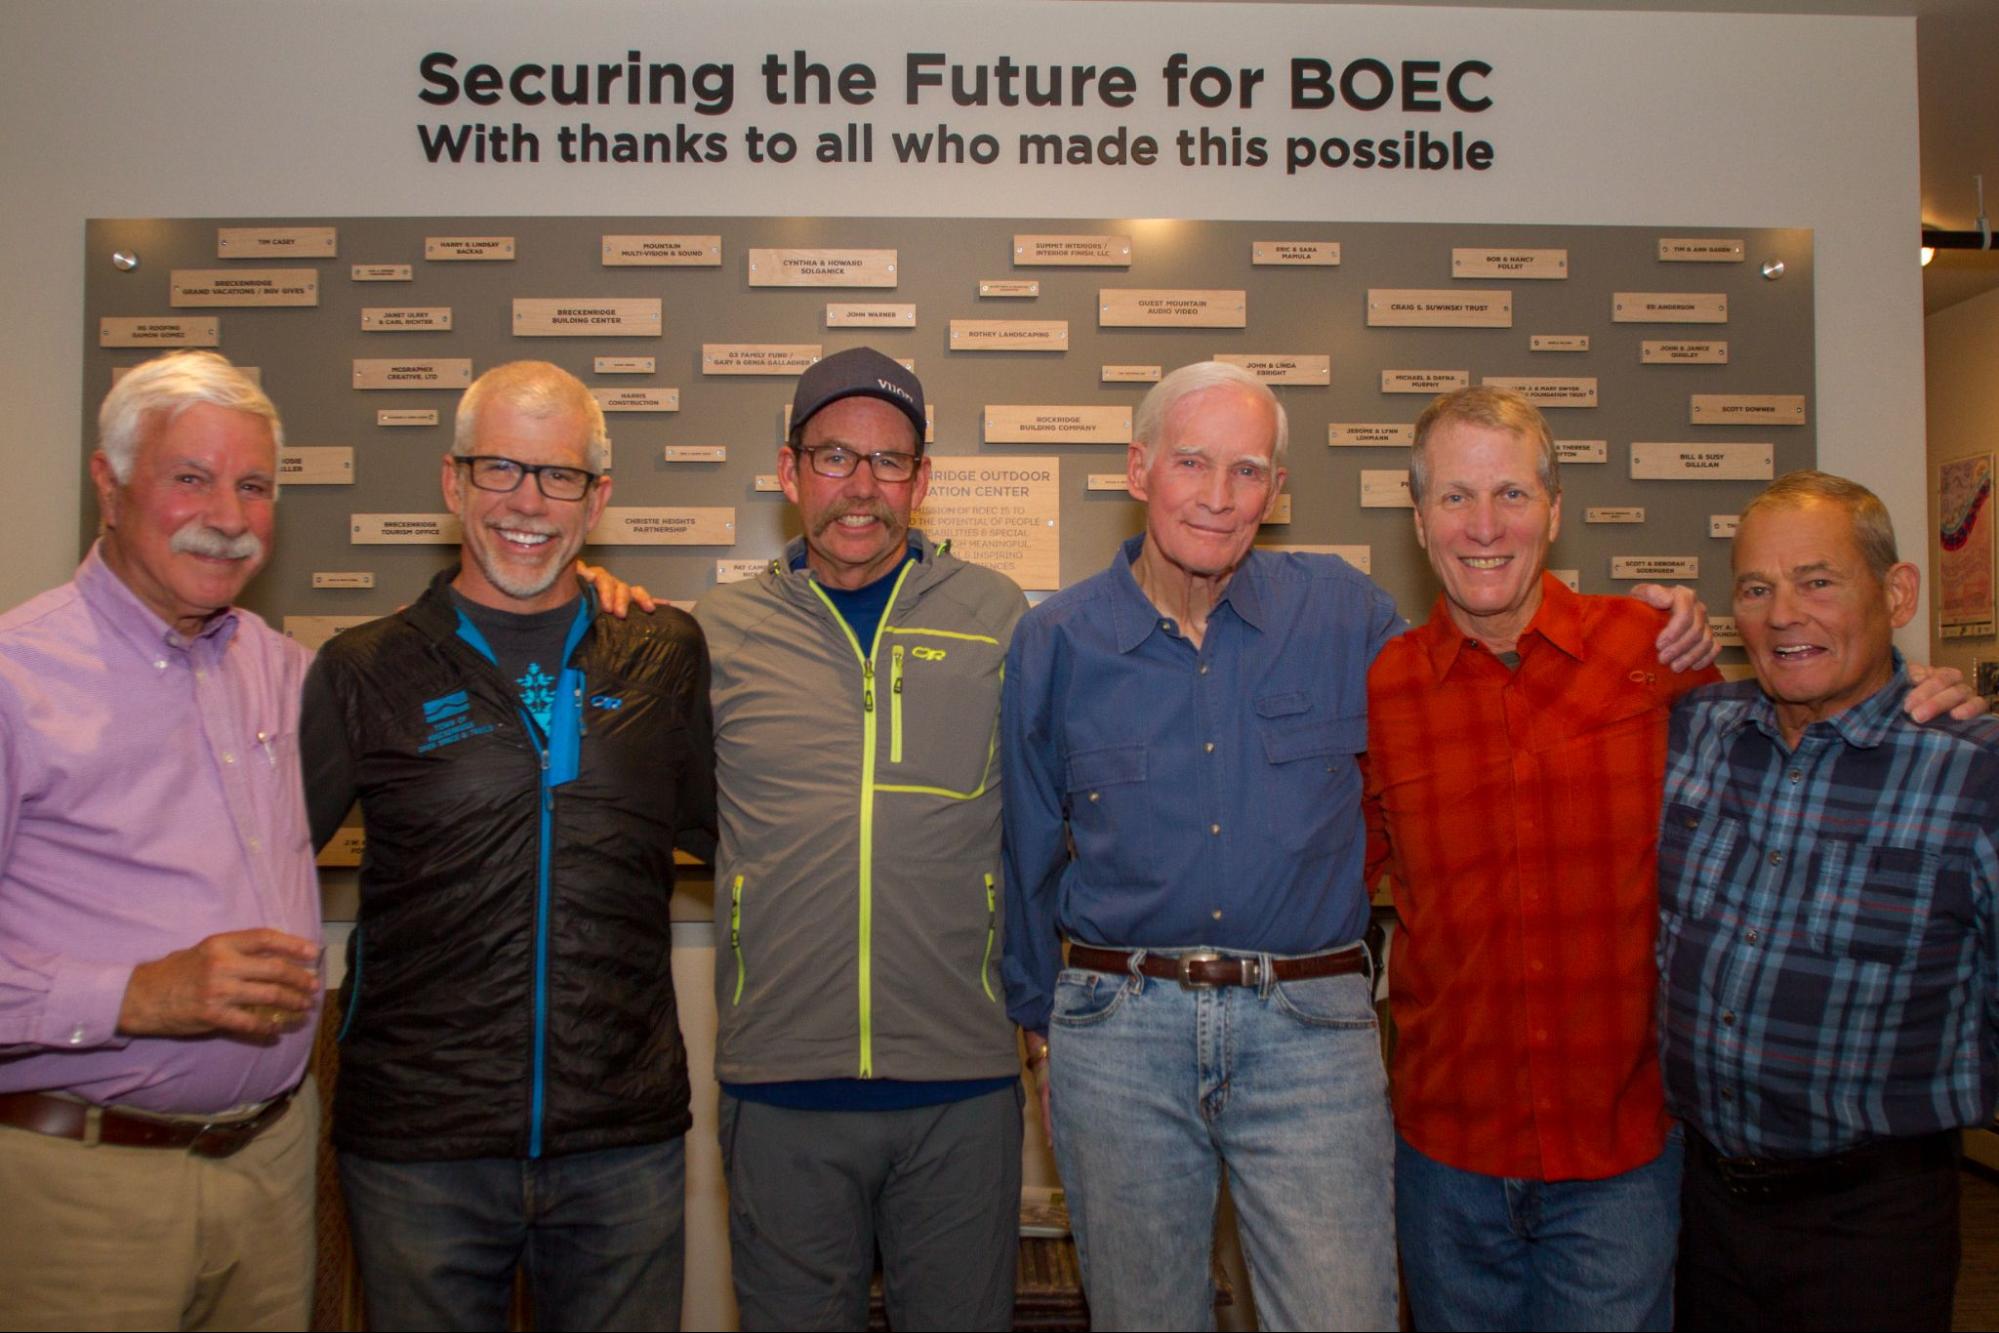 Aris Sophocles, Eric Mamula, Pete Joyce, Tim Casey and Gene Dayton at the grand opening of BOEC’s new HQ and staff housing building.